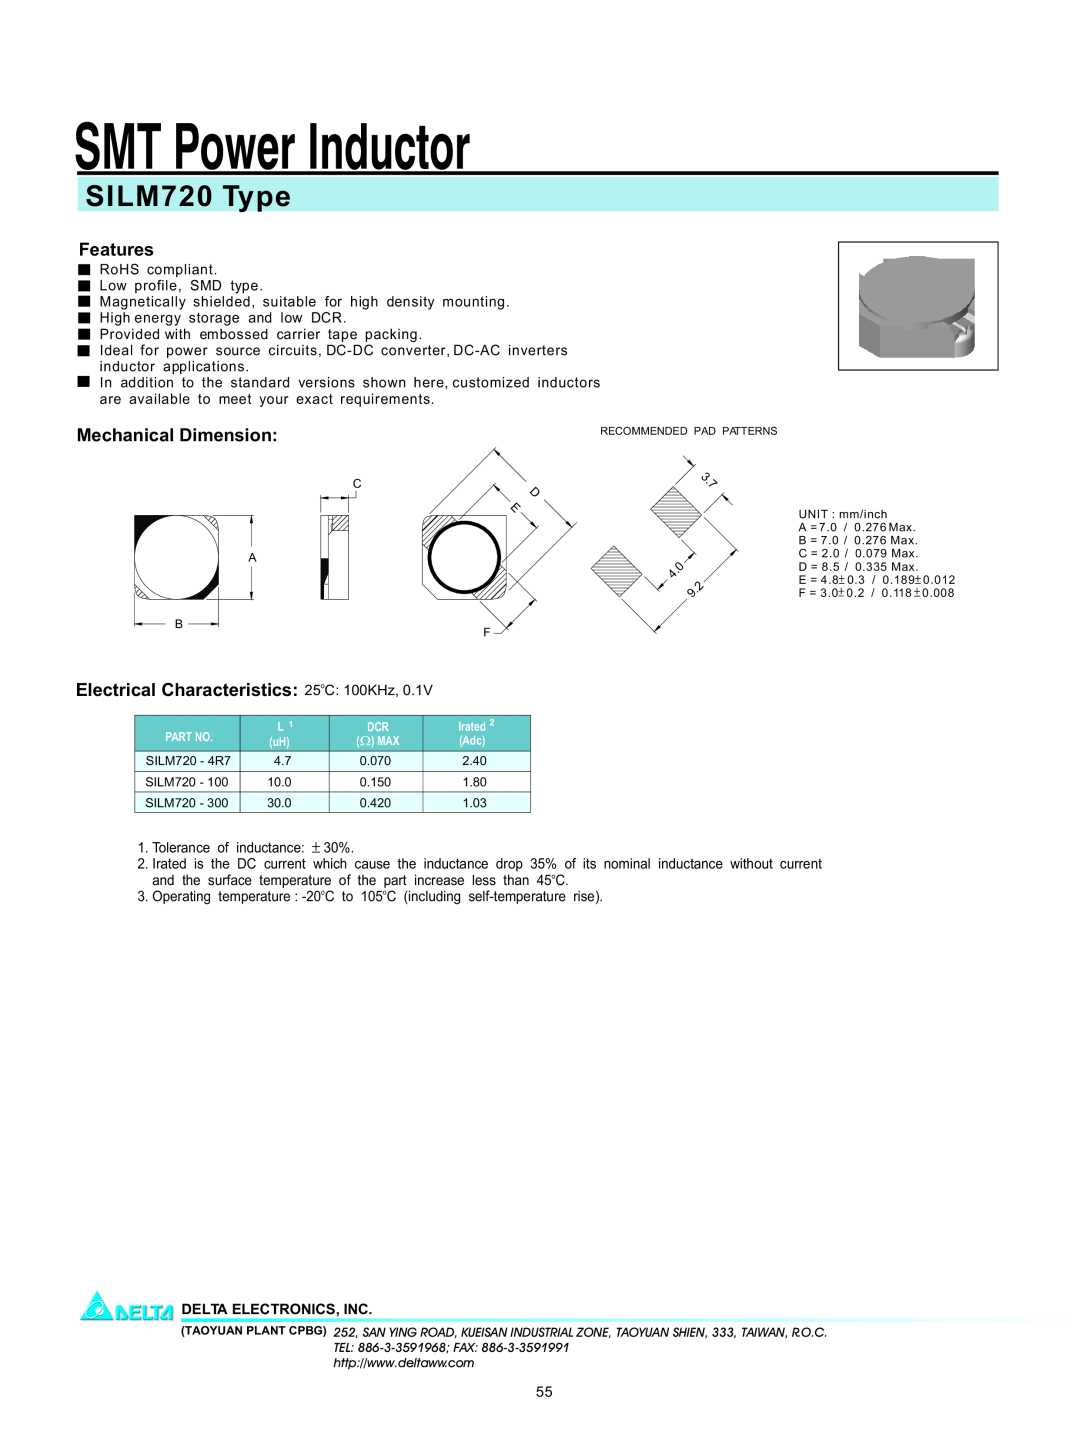 Delta Electronics manual SMT Power Inductor, SILM720 Type, Features, Mechanical Dimension, Delta Electronics, Inc 